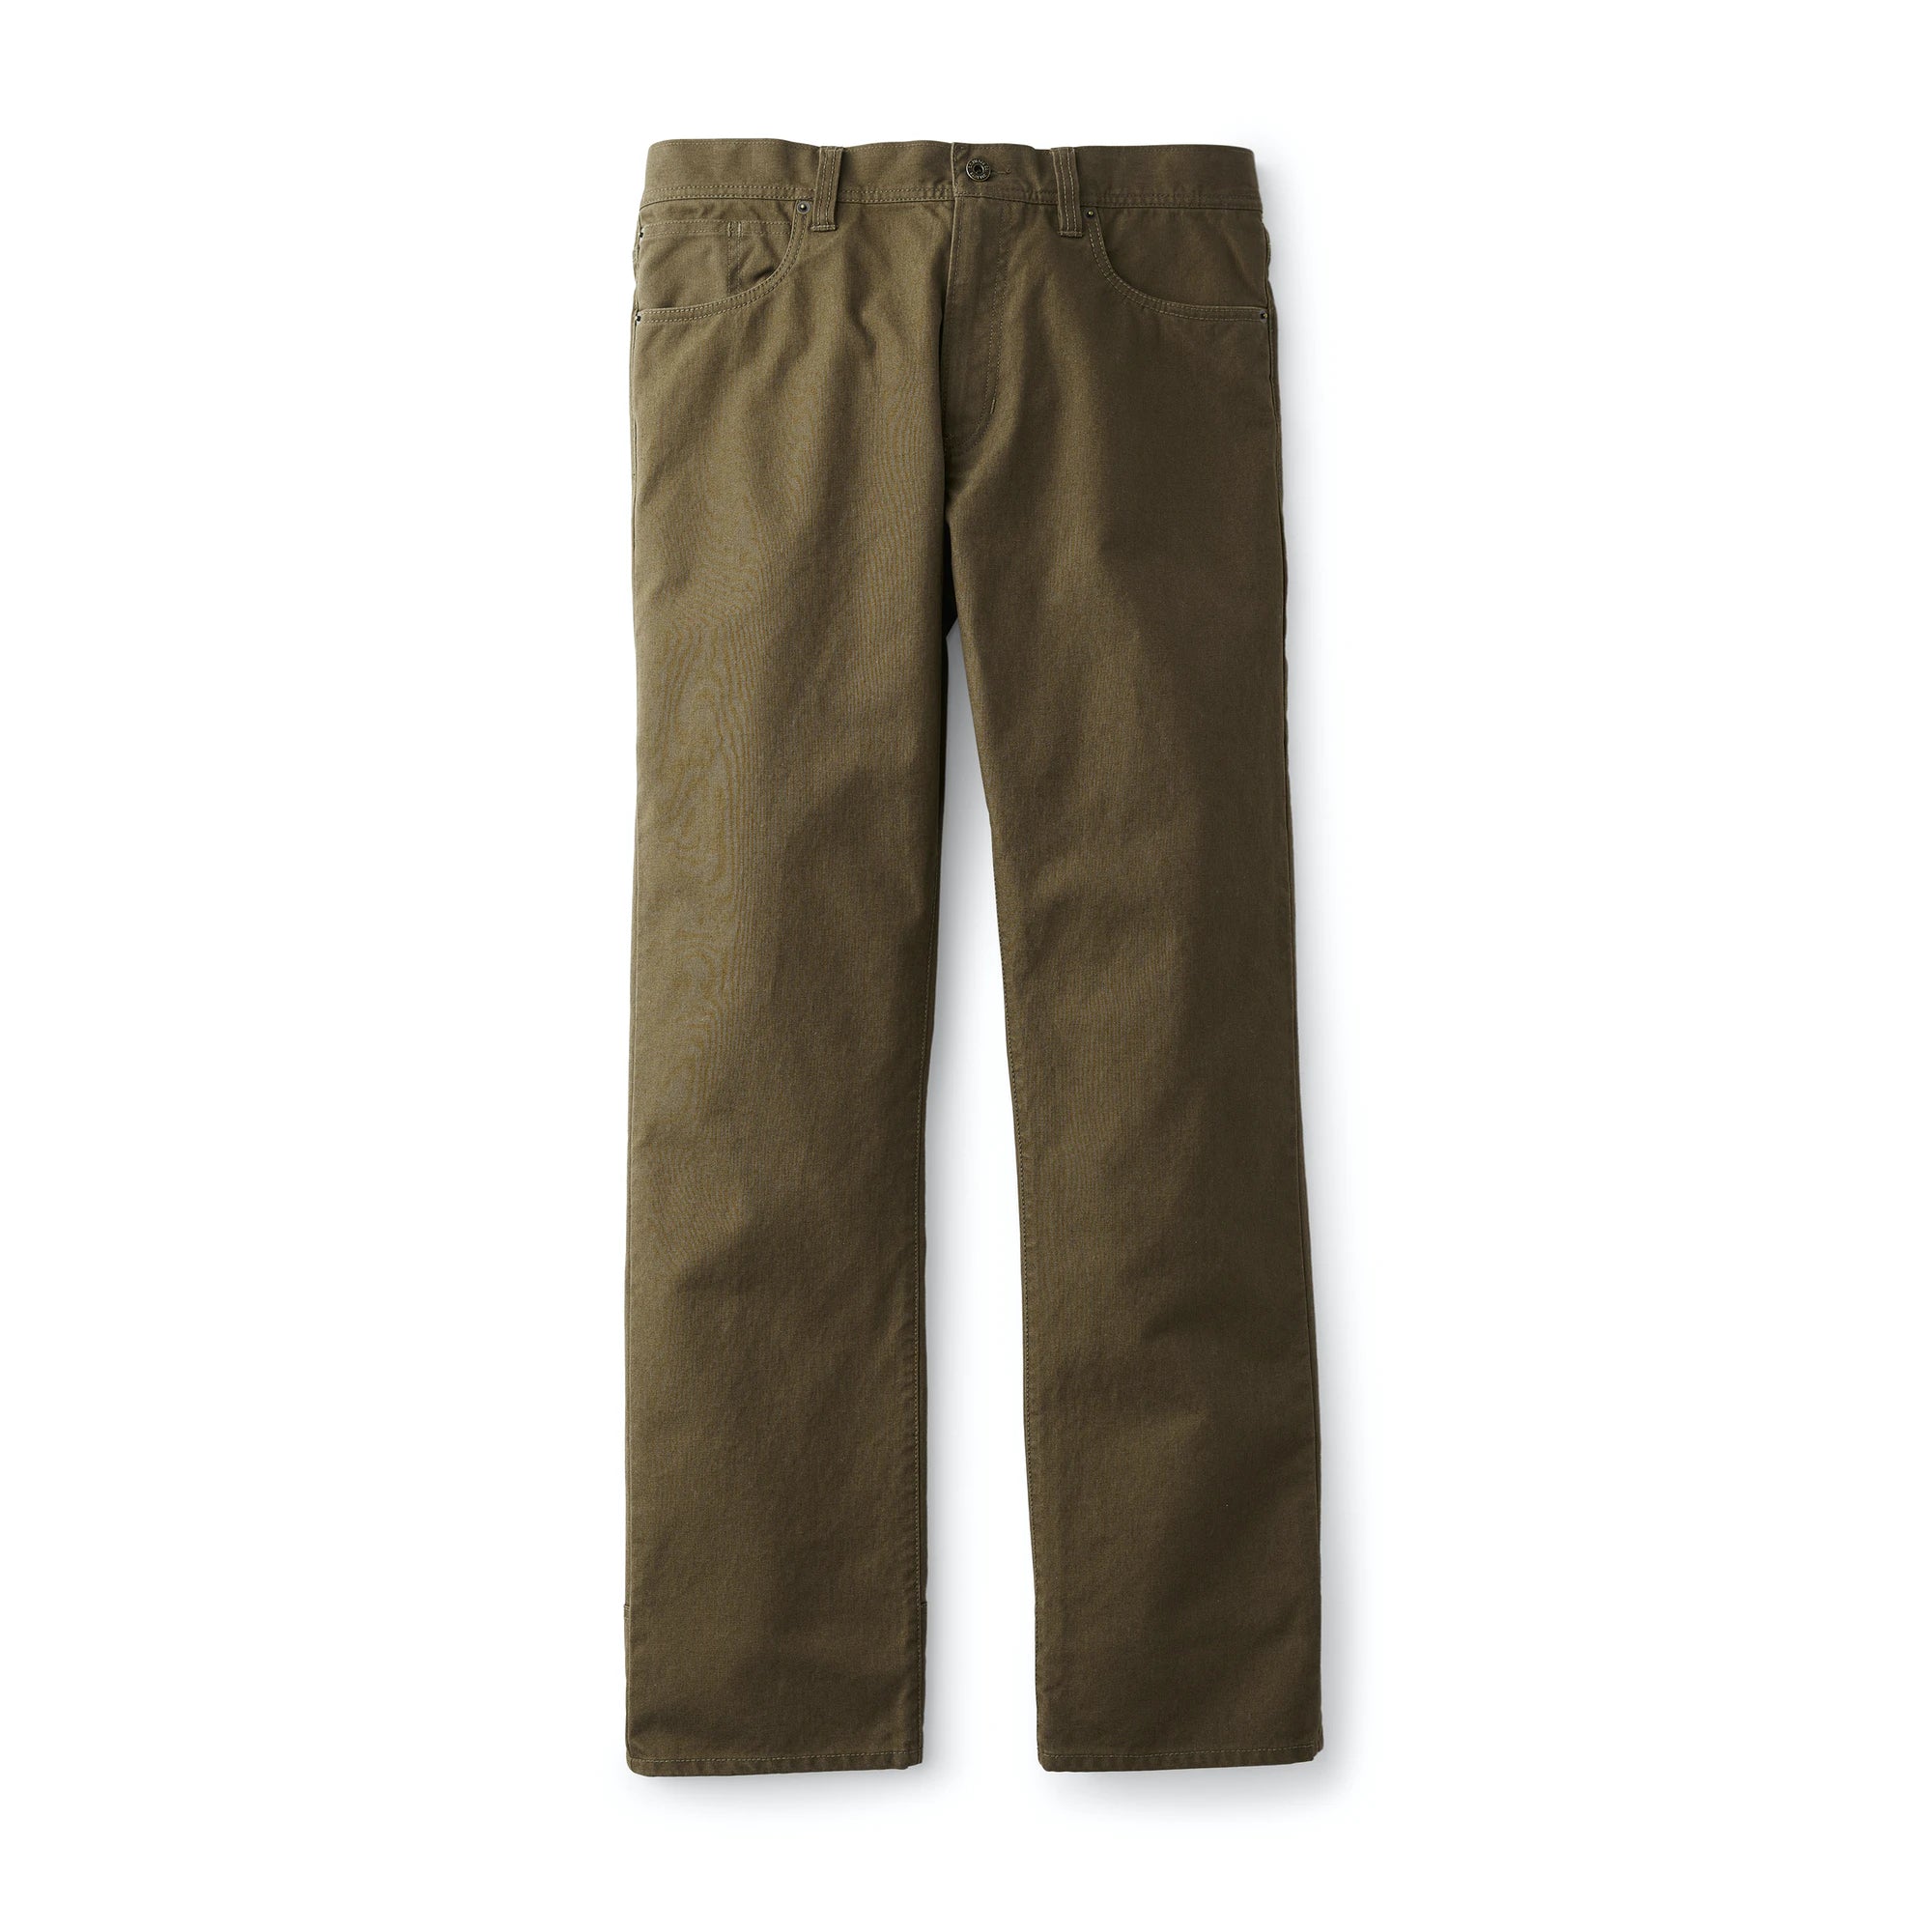 Double Front Dry Tin 5 Pocket Utility Pant "MarshOlive"